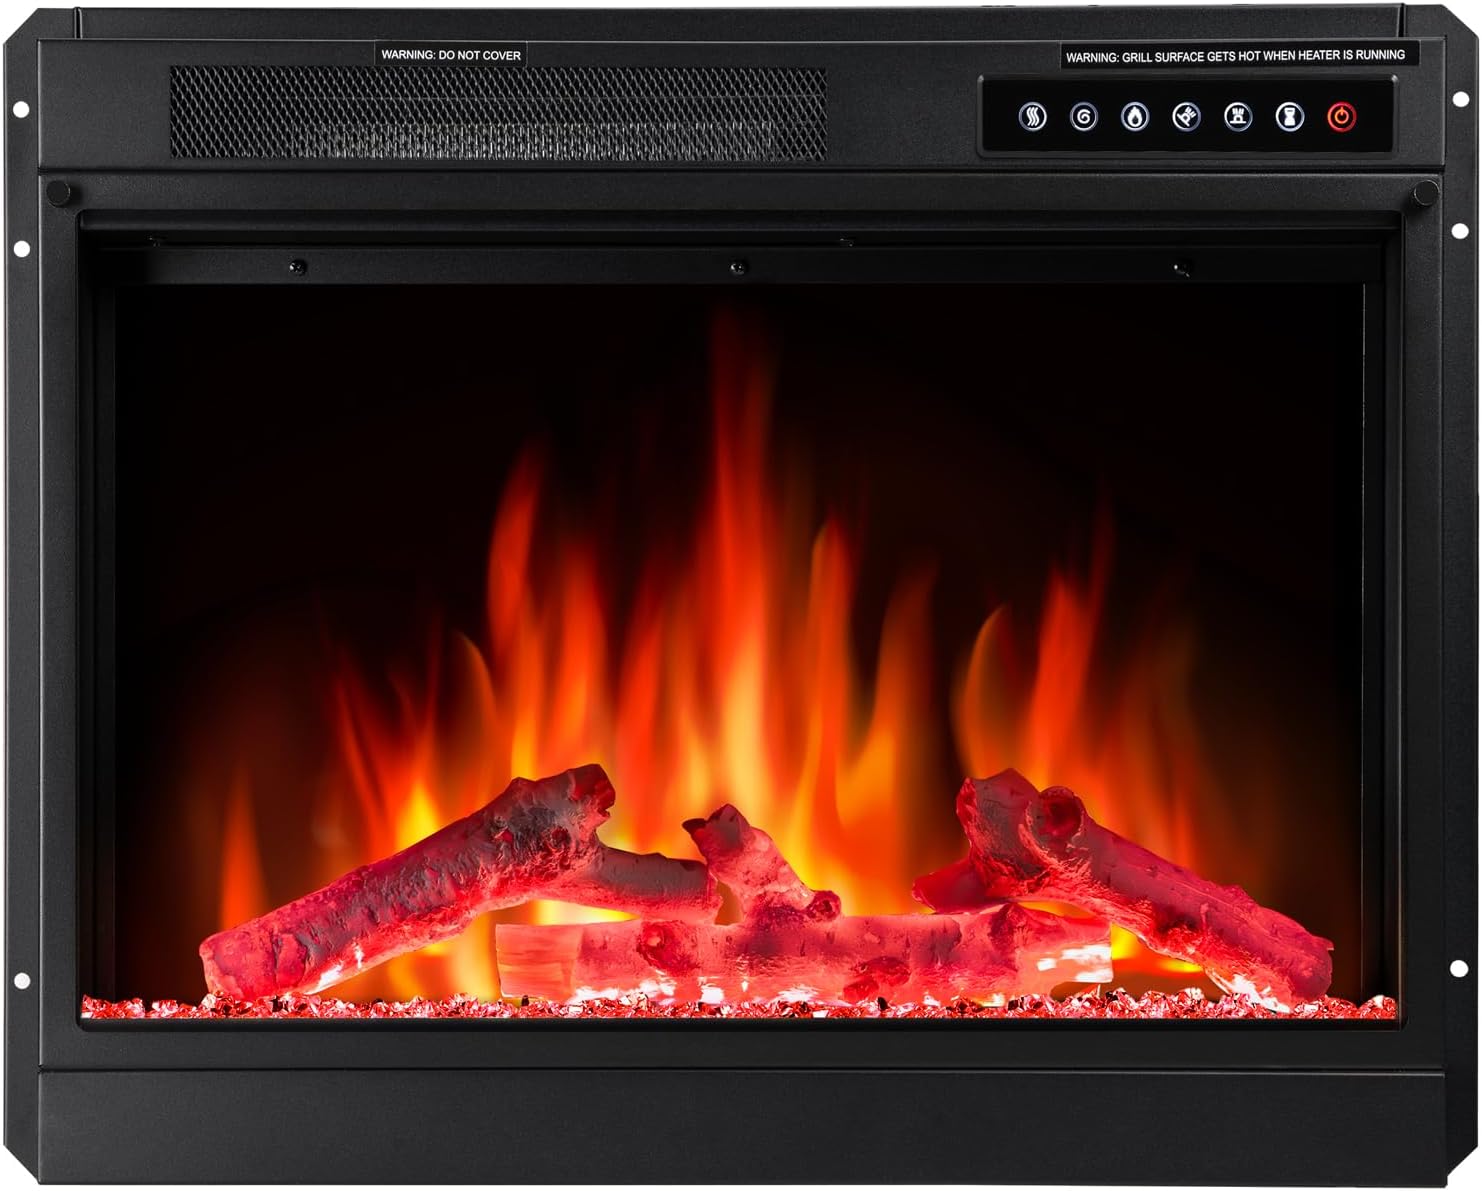 R.W.FLAME 23" Electric Fireplace Insert, Adjustable Led Flame Brightness and 2 Power Setting, 750W/1500W